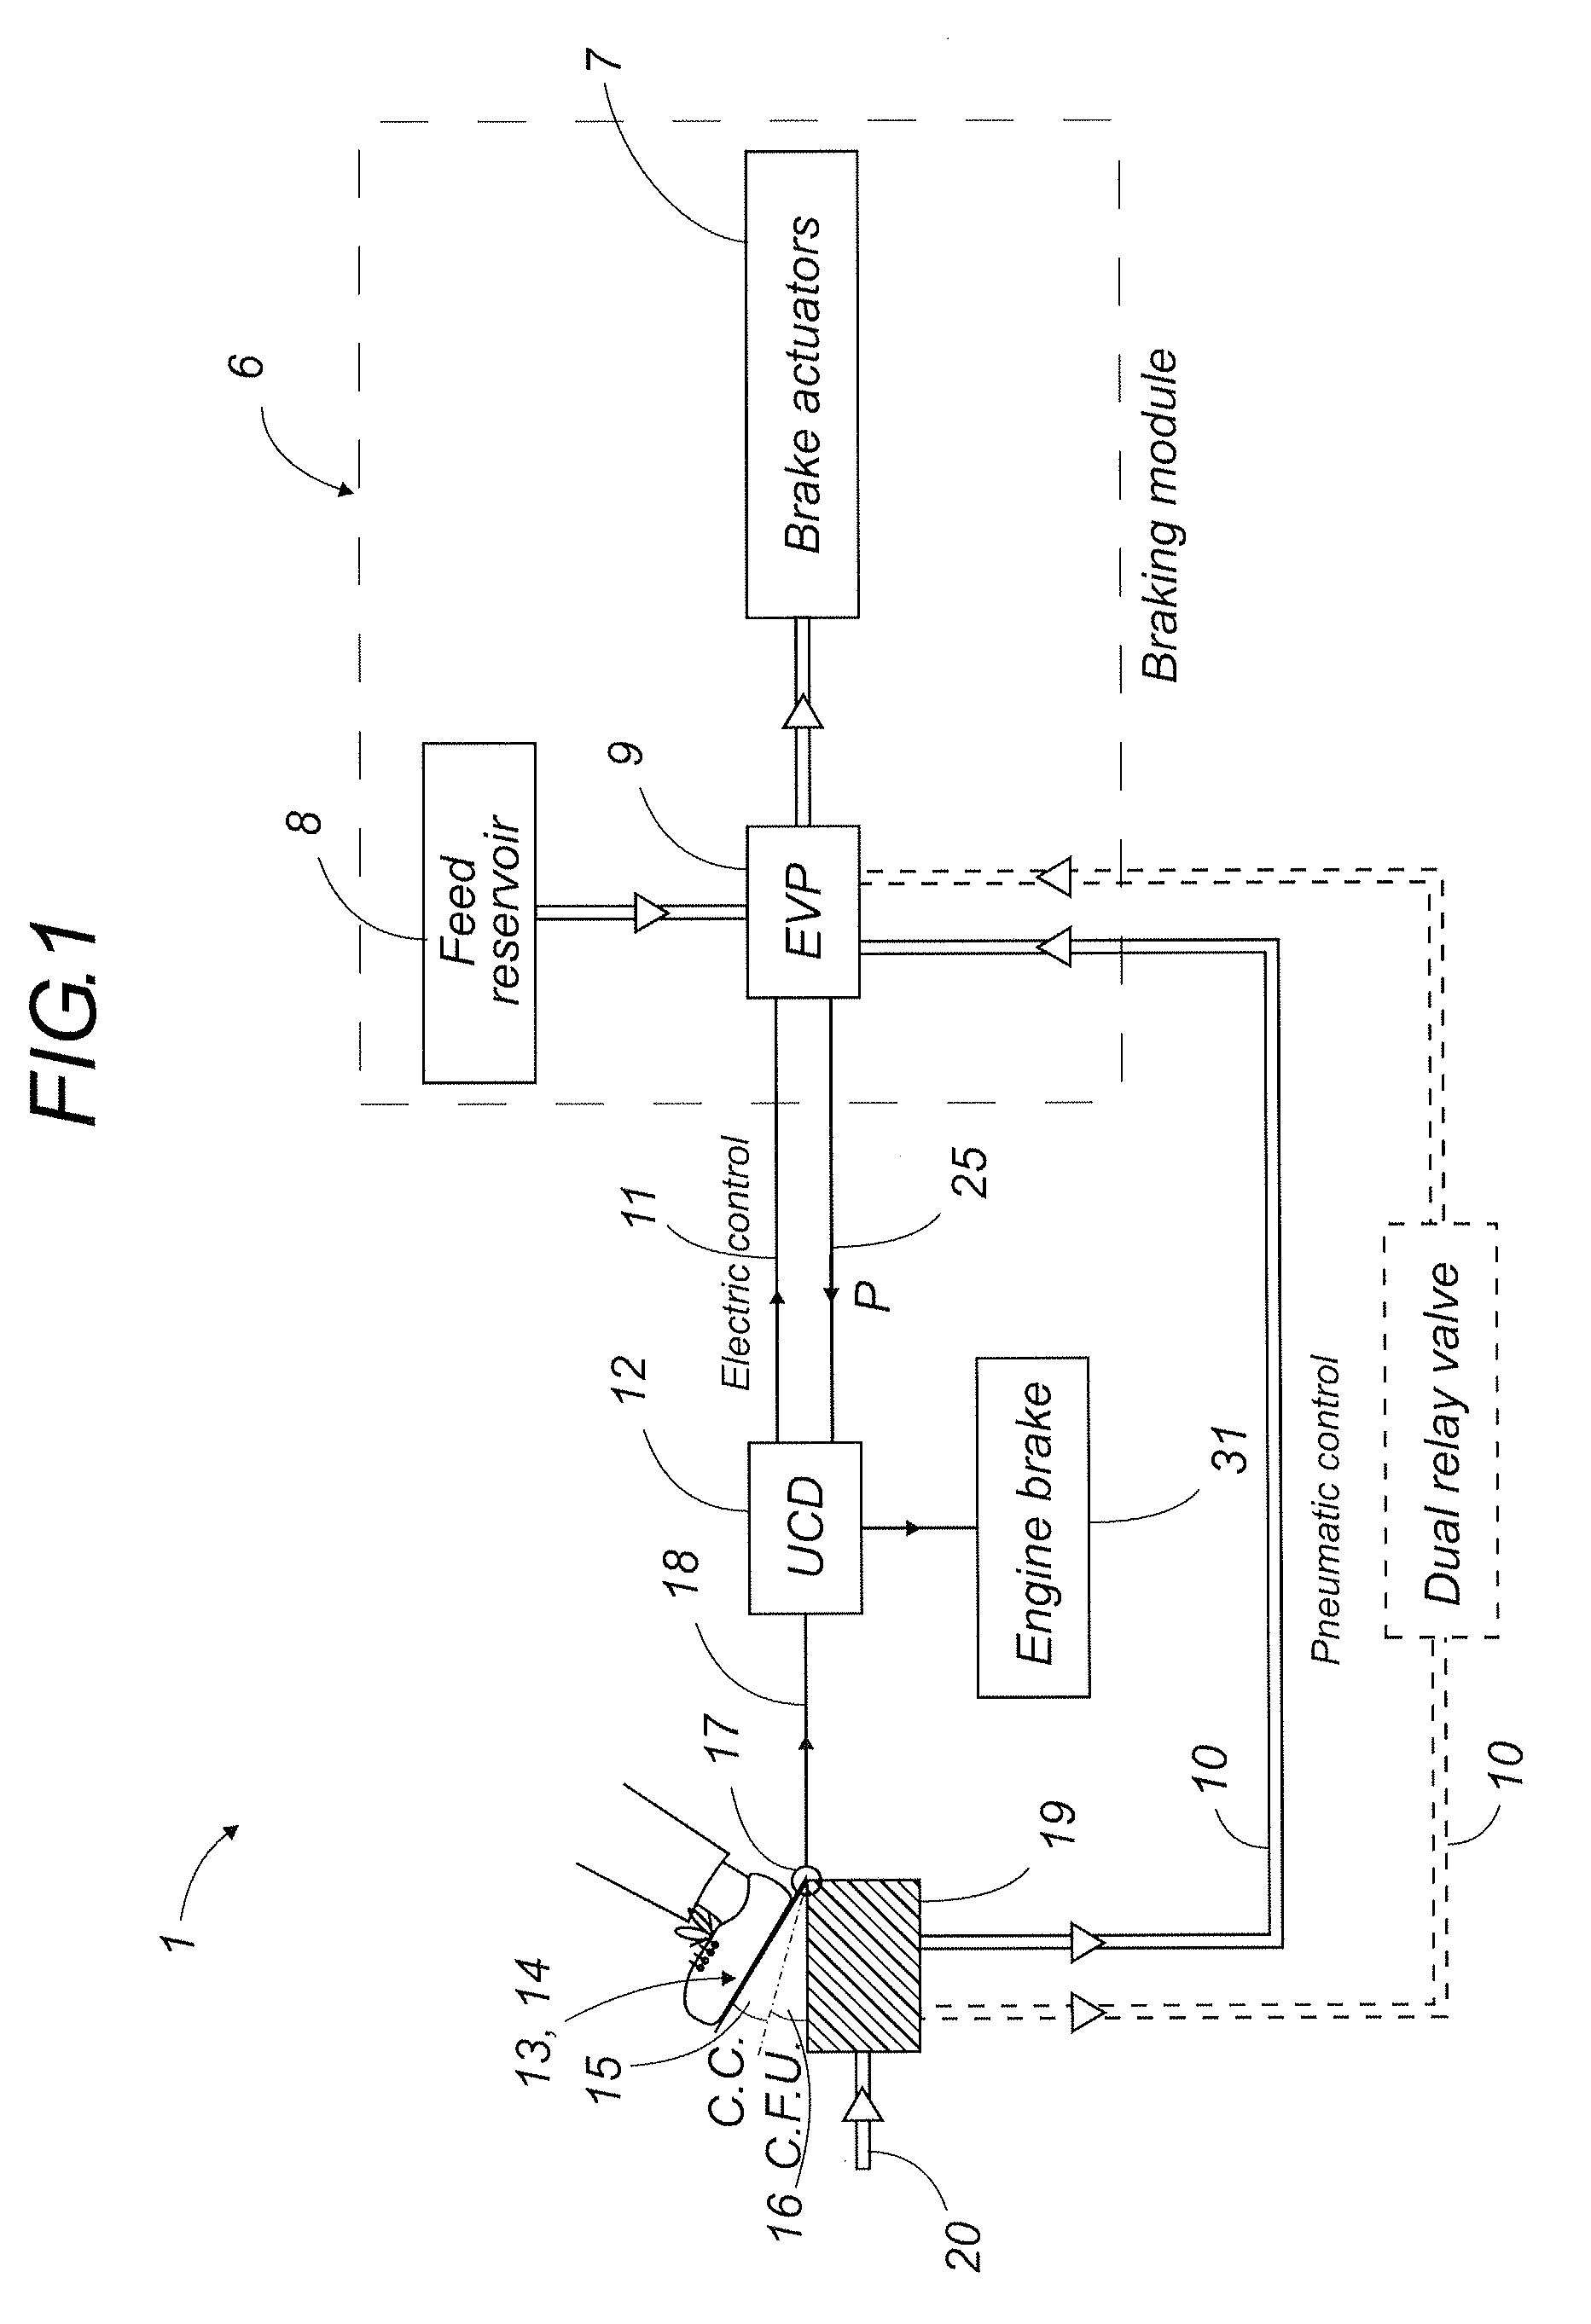 Two-stage electromechanically controlled braking system for a multiaxle road vehicles